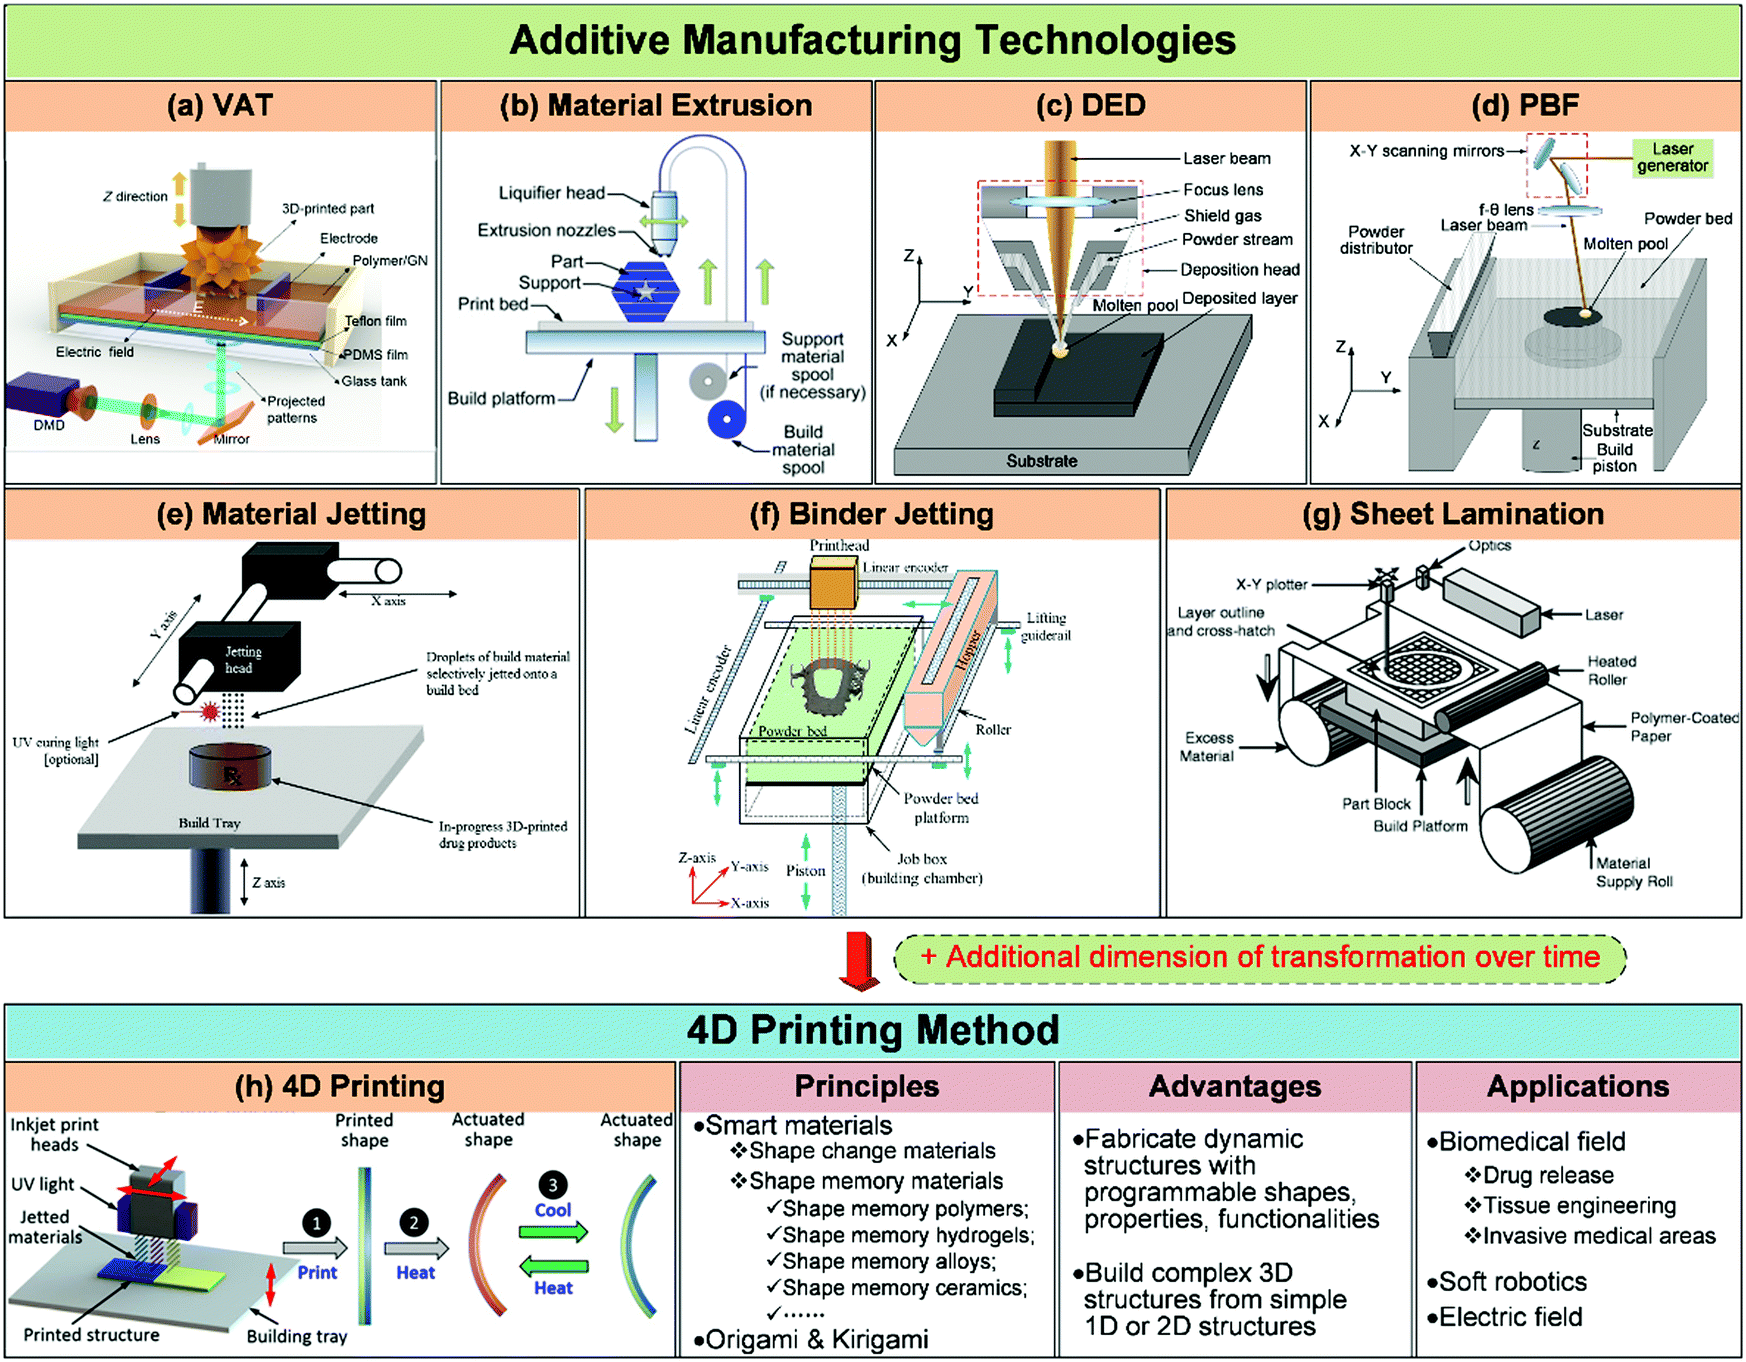 Recent progress in field-assisted additive manufacturing: materials,  methodologies, and applications - Materials Horizons (RSC Publishing)  DOI:10.1039/D0MH01322F